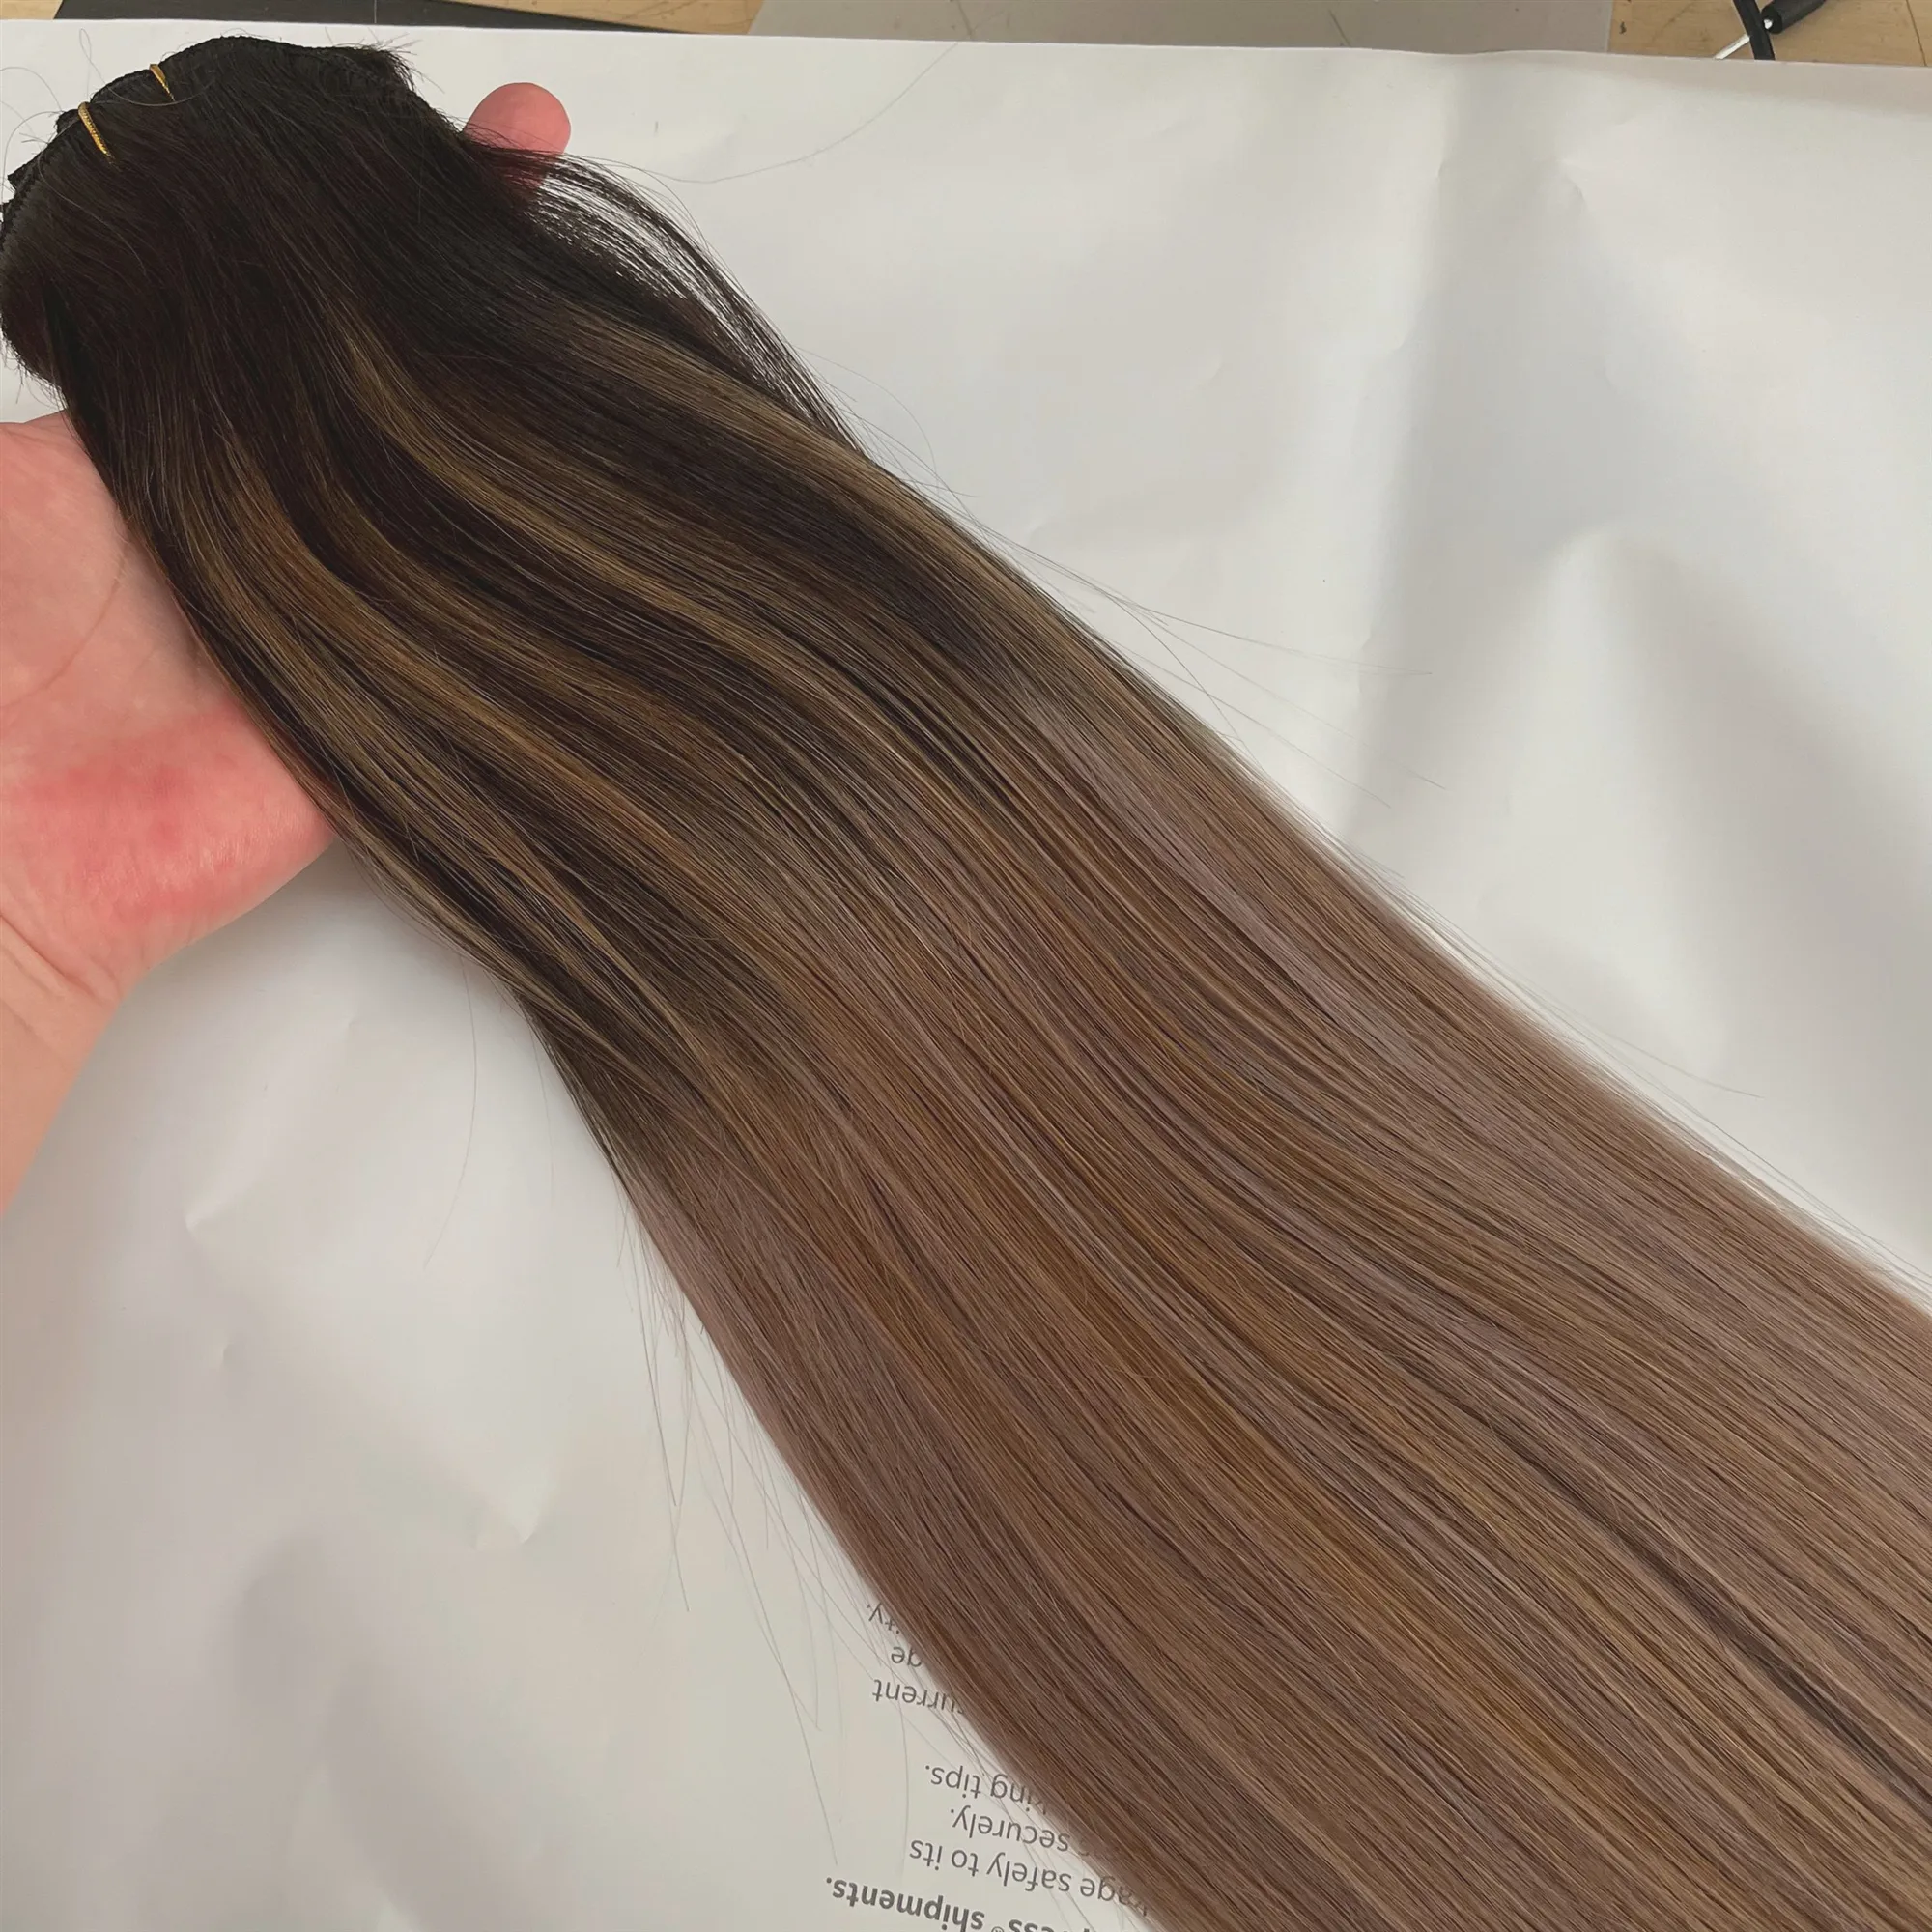 Ombre Clip in Hair Extensions 2/6/18 Balayage Slik Straight Virgin Brazilian Real Clip on Human Hair Extension 120g